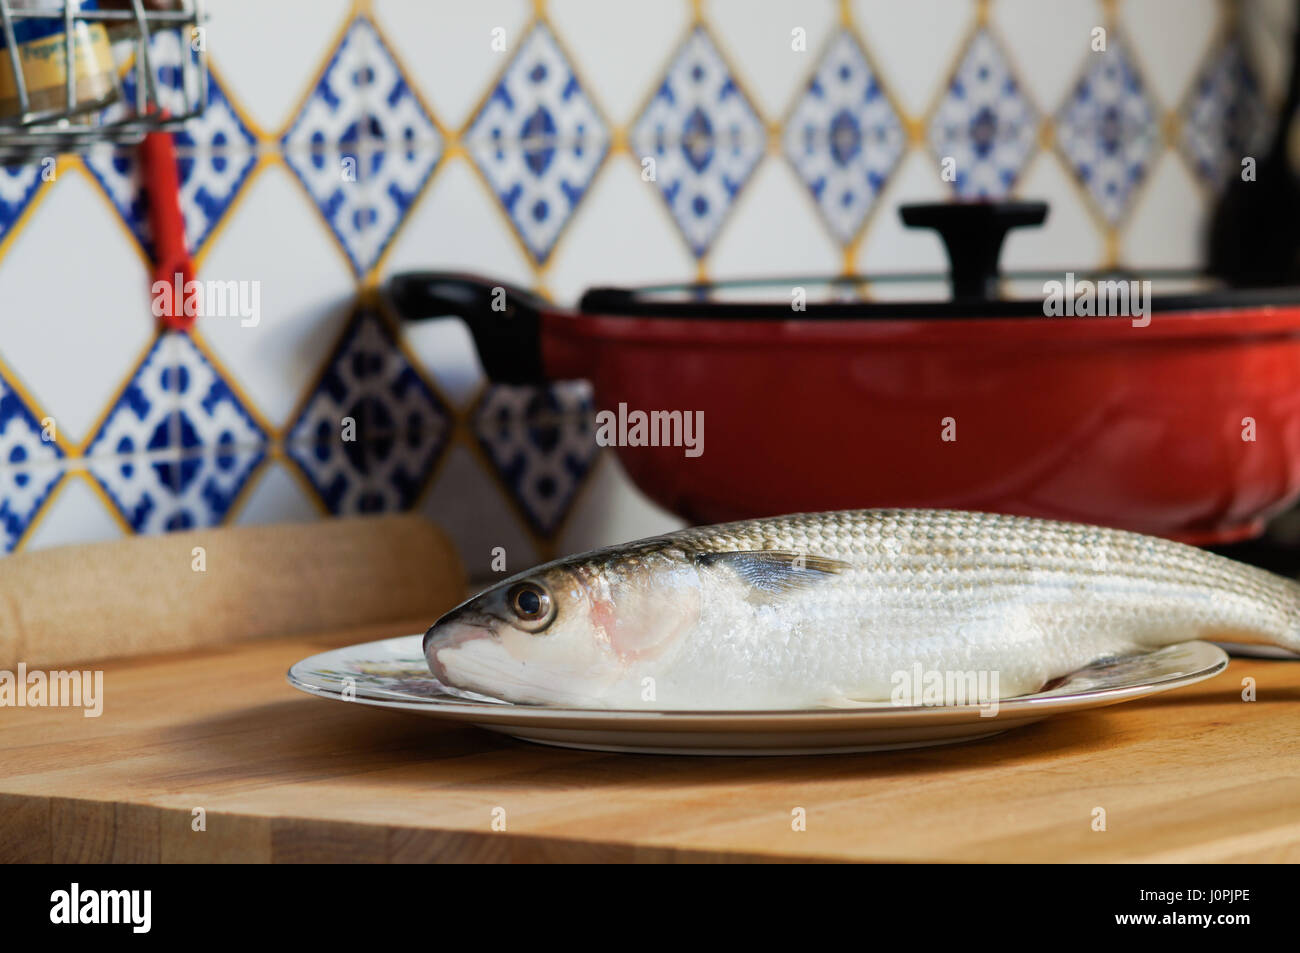 Mullet striped mullet contains omega-3 acids, vitamins and minerals. Mullet lying on plate ready for cooking. Stock Photo